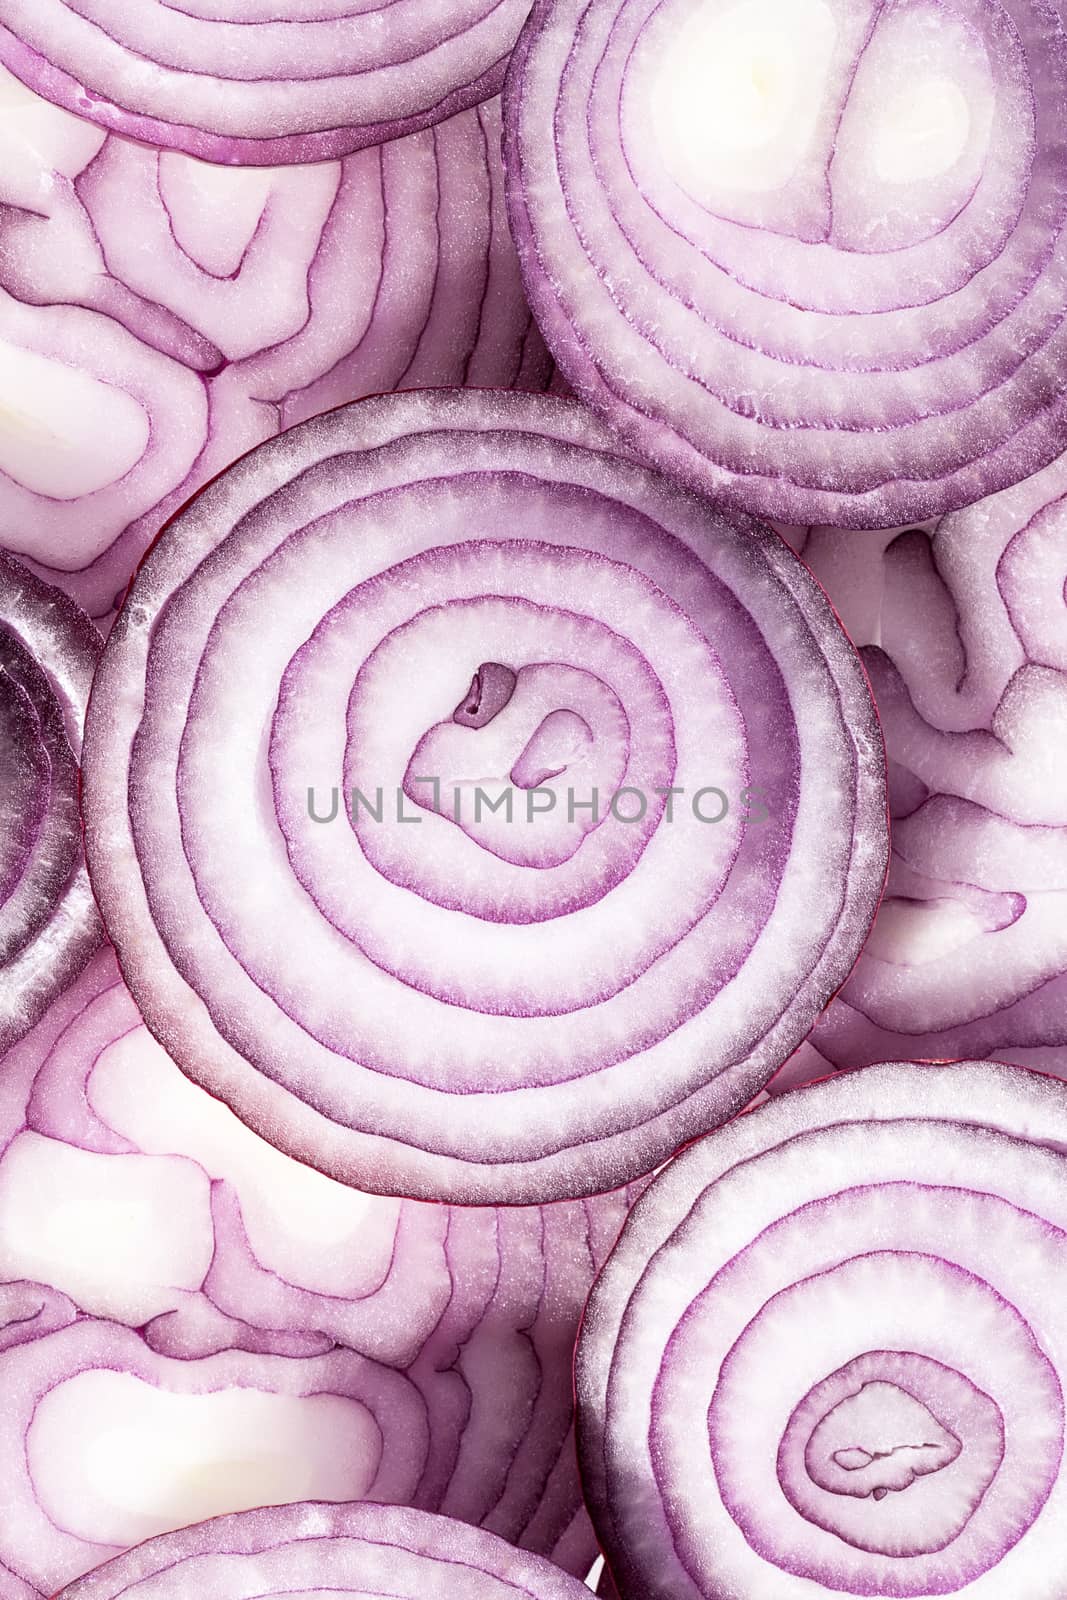 Background of red onion slices by mychadre77